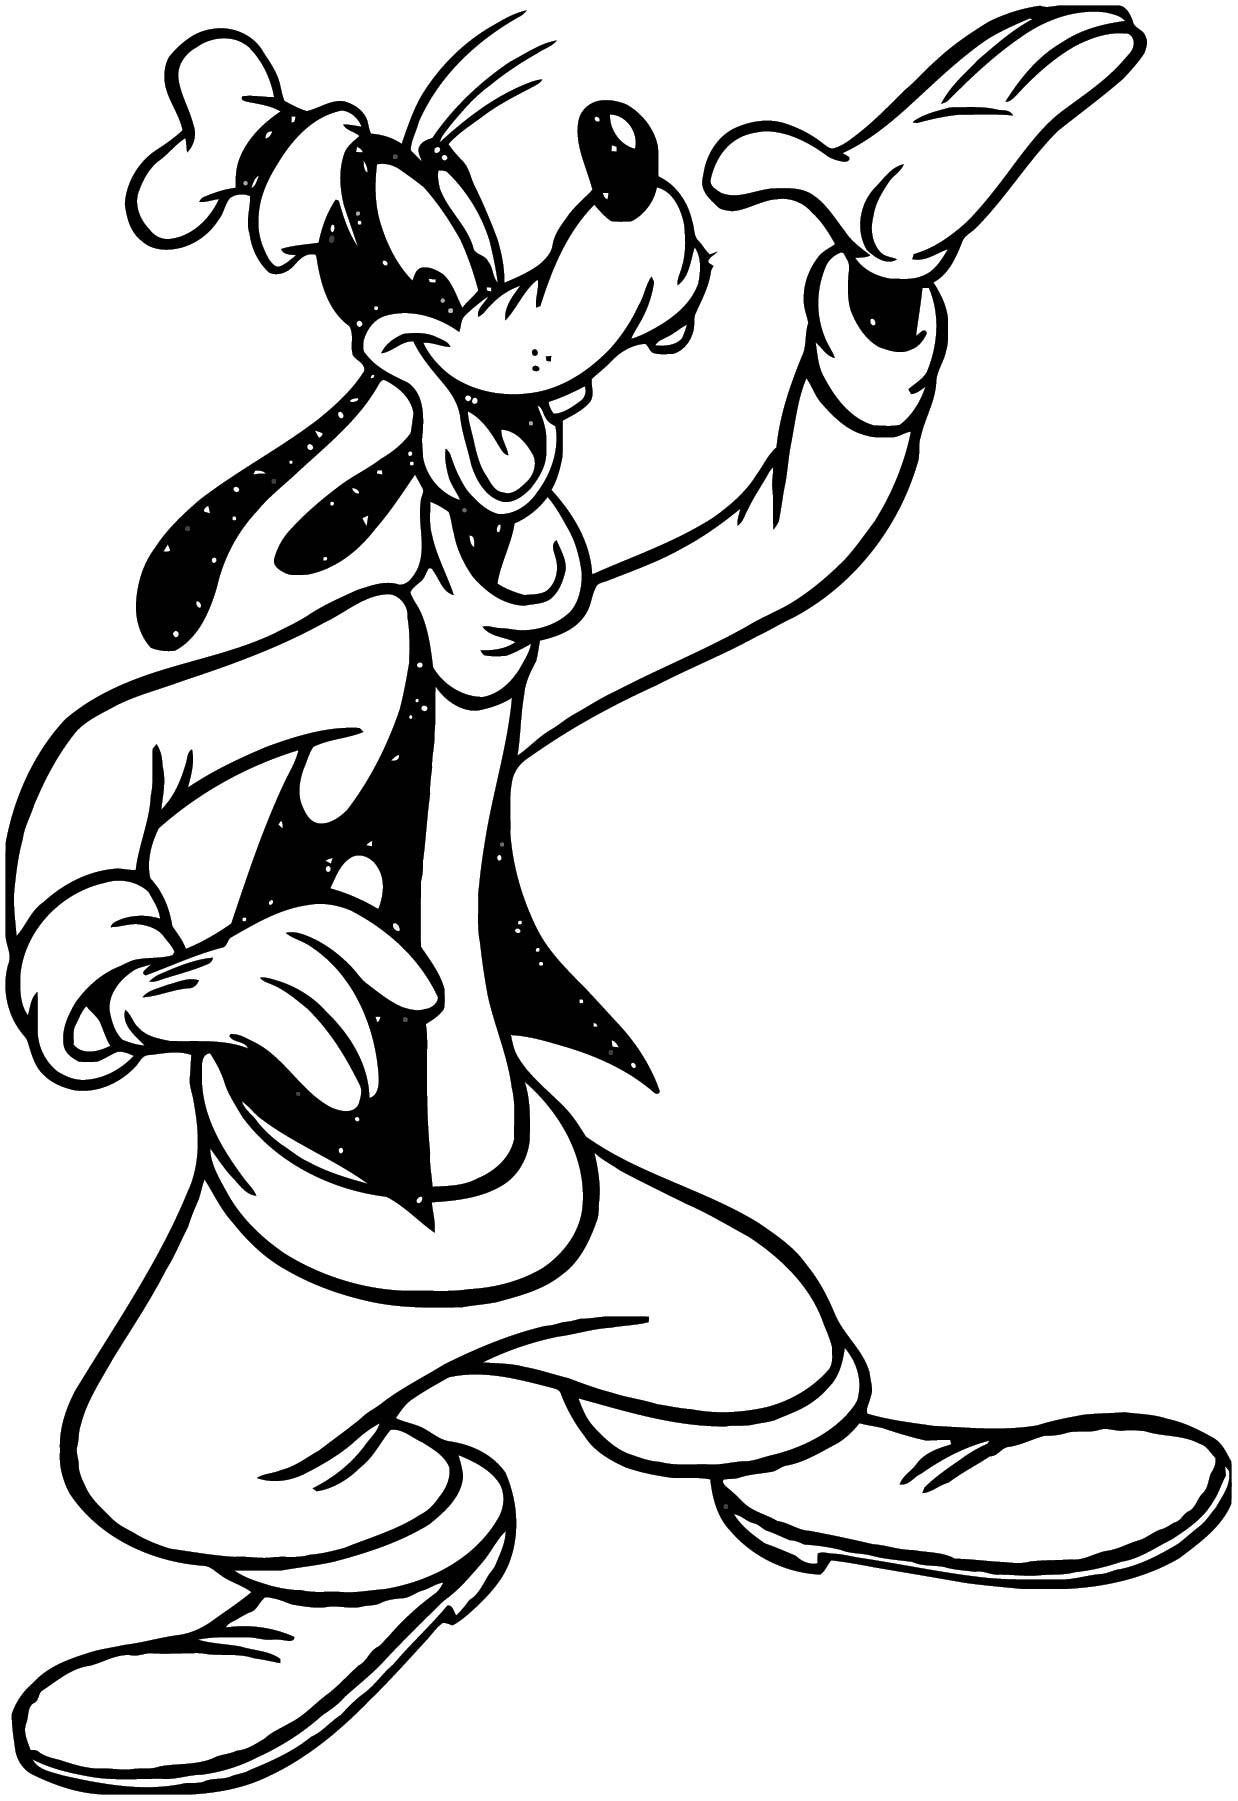 goofy coloring page goofy coloring pages 17 wecoloringpagecom goofy coloring page 